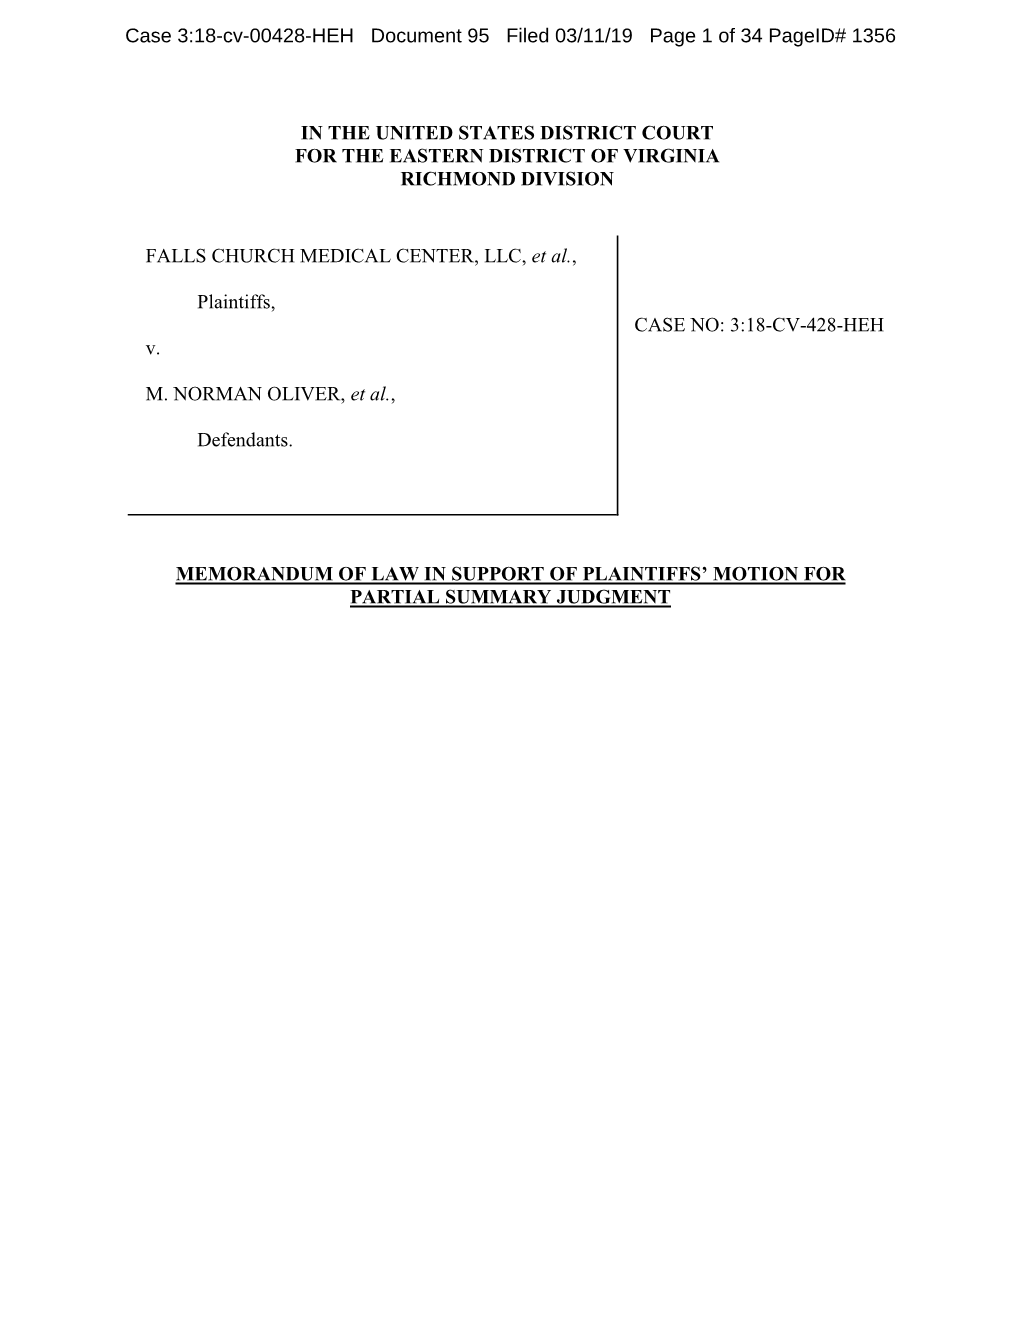 Memo of Law in Support of Summary Judgment.Pdf